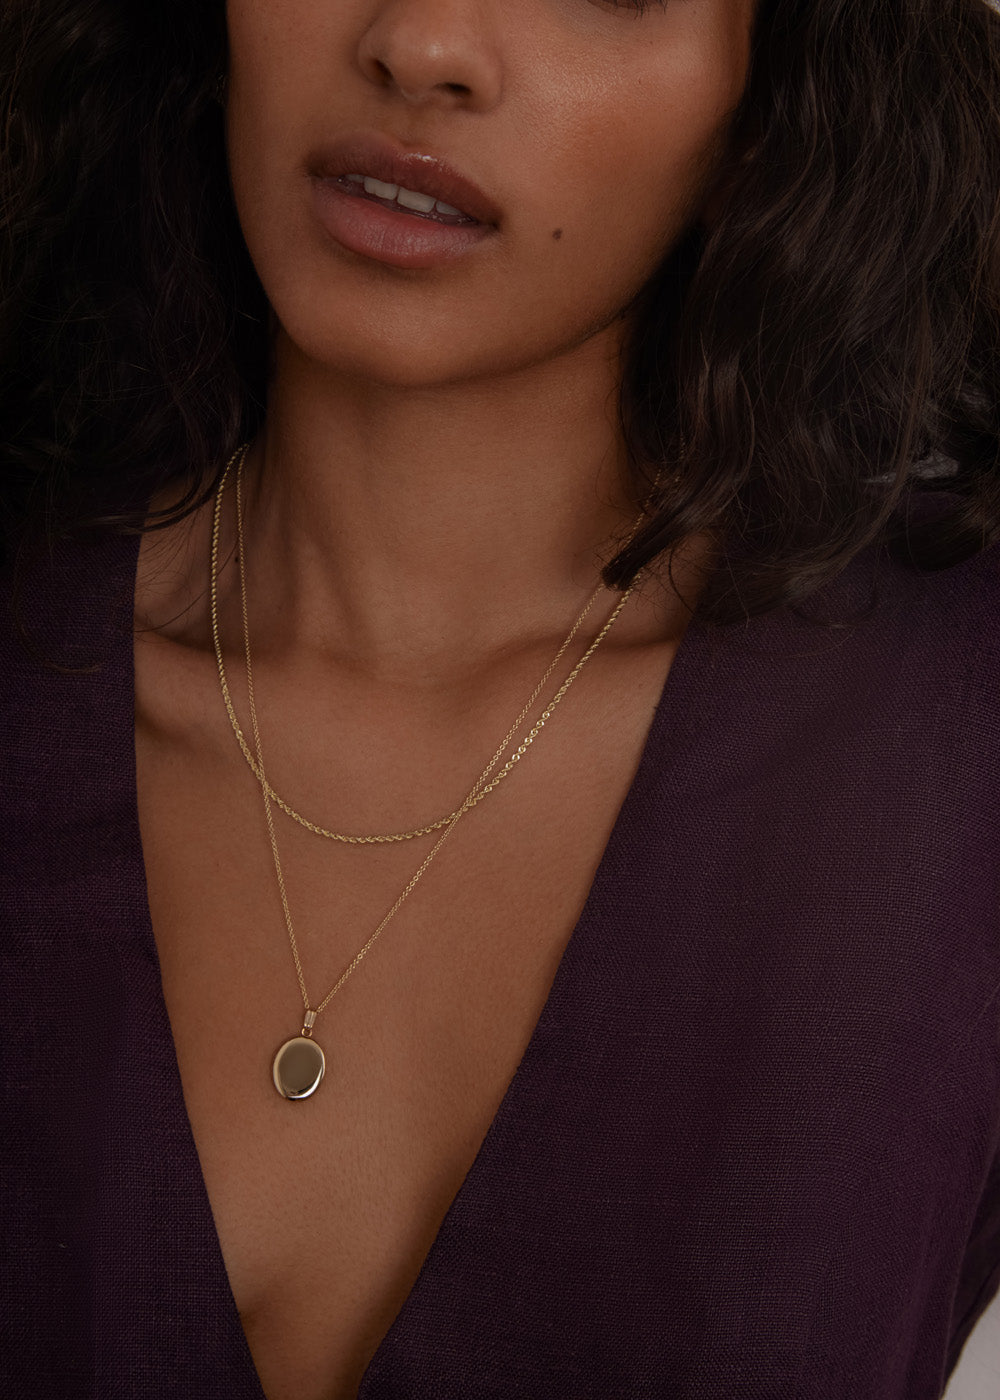 alt="Maison Oval Locket & Petite Rope Chain Necklace Stack"